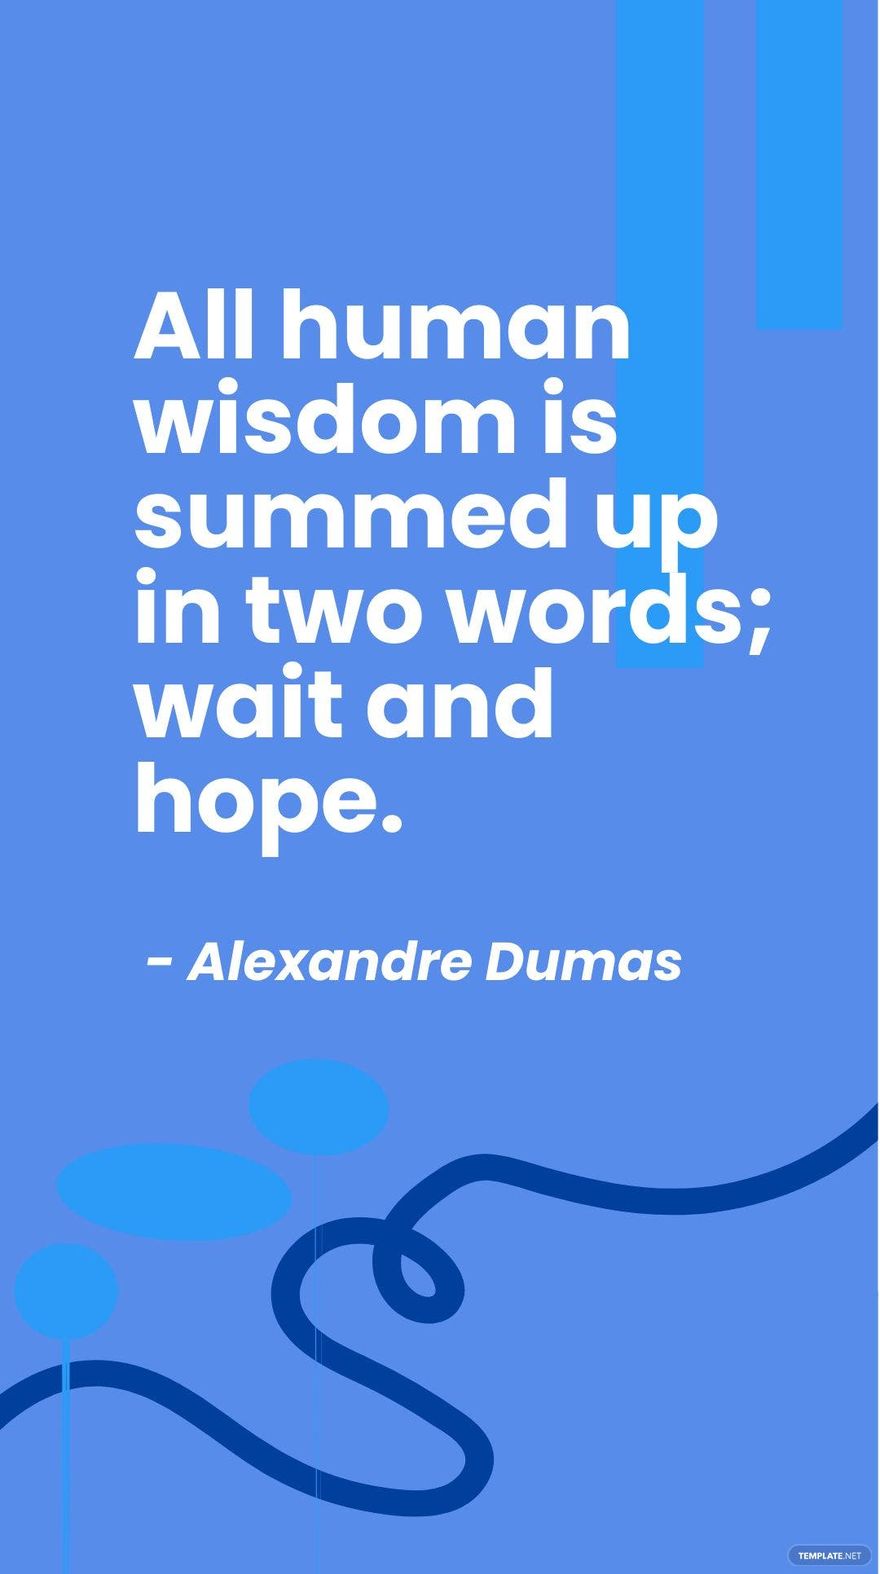 Alexandre Dumas - All human wisdom is summed up in two words; wait and hope.